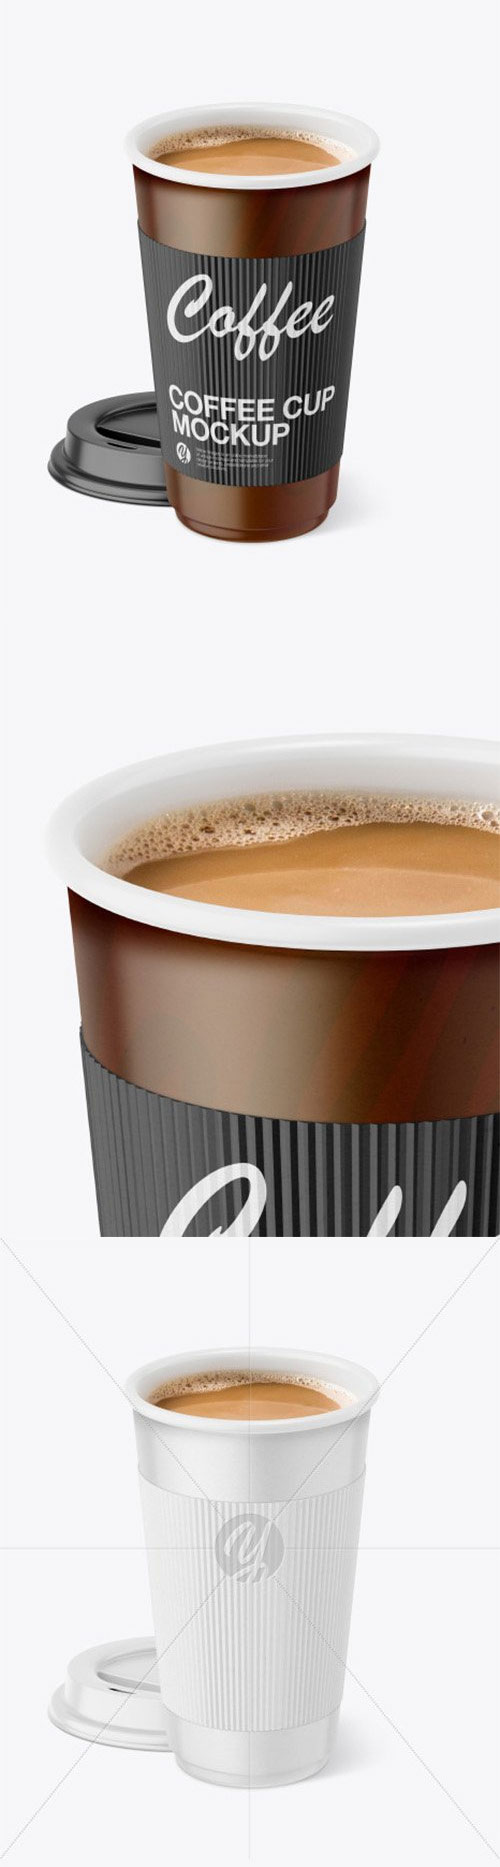 Paper Coffee Cup With Holder Mockup 78493